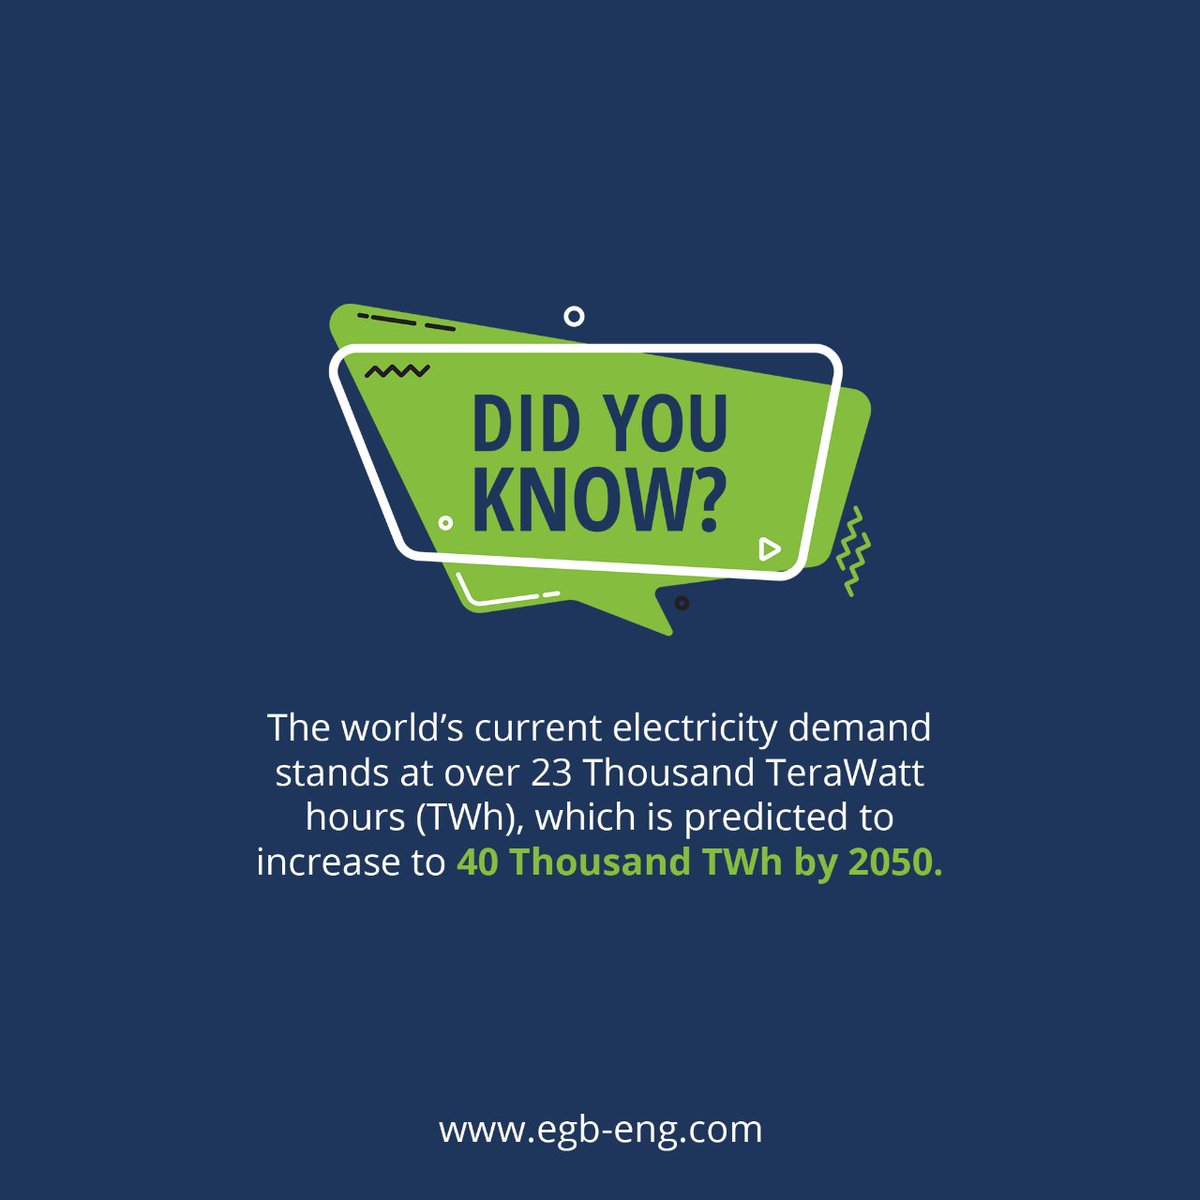 Did you know that the world's current electricity demand is over 23 Thousand TeraWatt hours (TWh) and is predicted to increase to 40 Thousand TWh by 2050. #electricitydemand #sustainability #cleanenergy #2050predictions #energyfuture #globalenergy #electricity